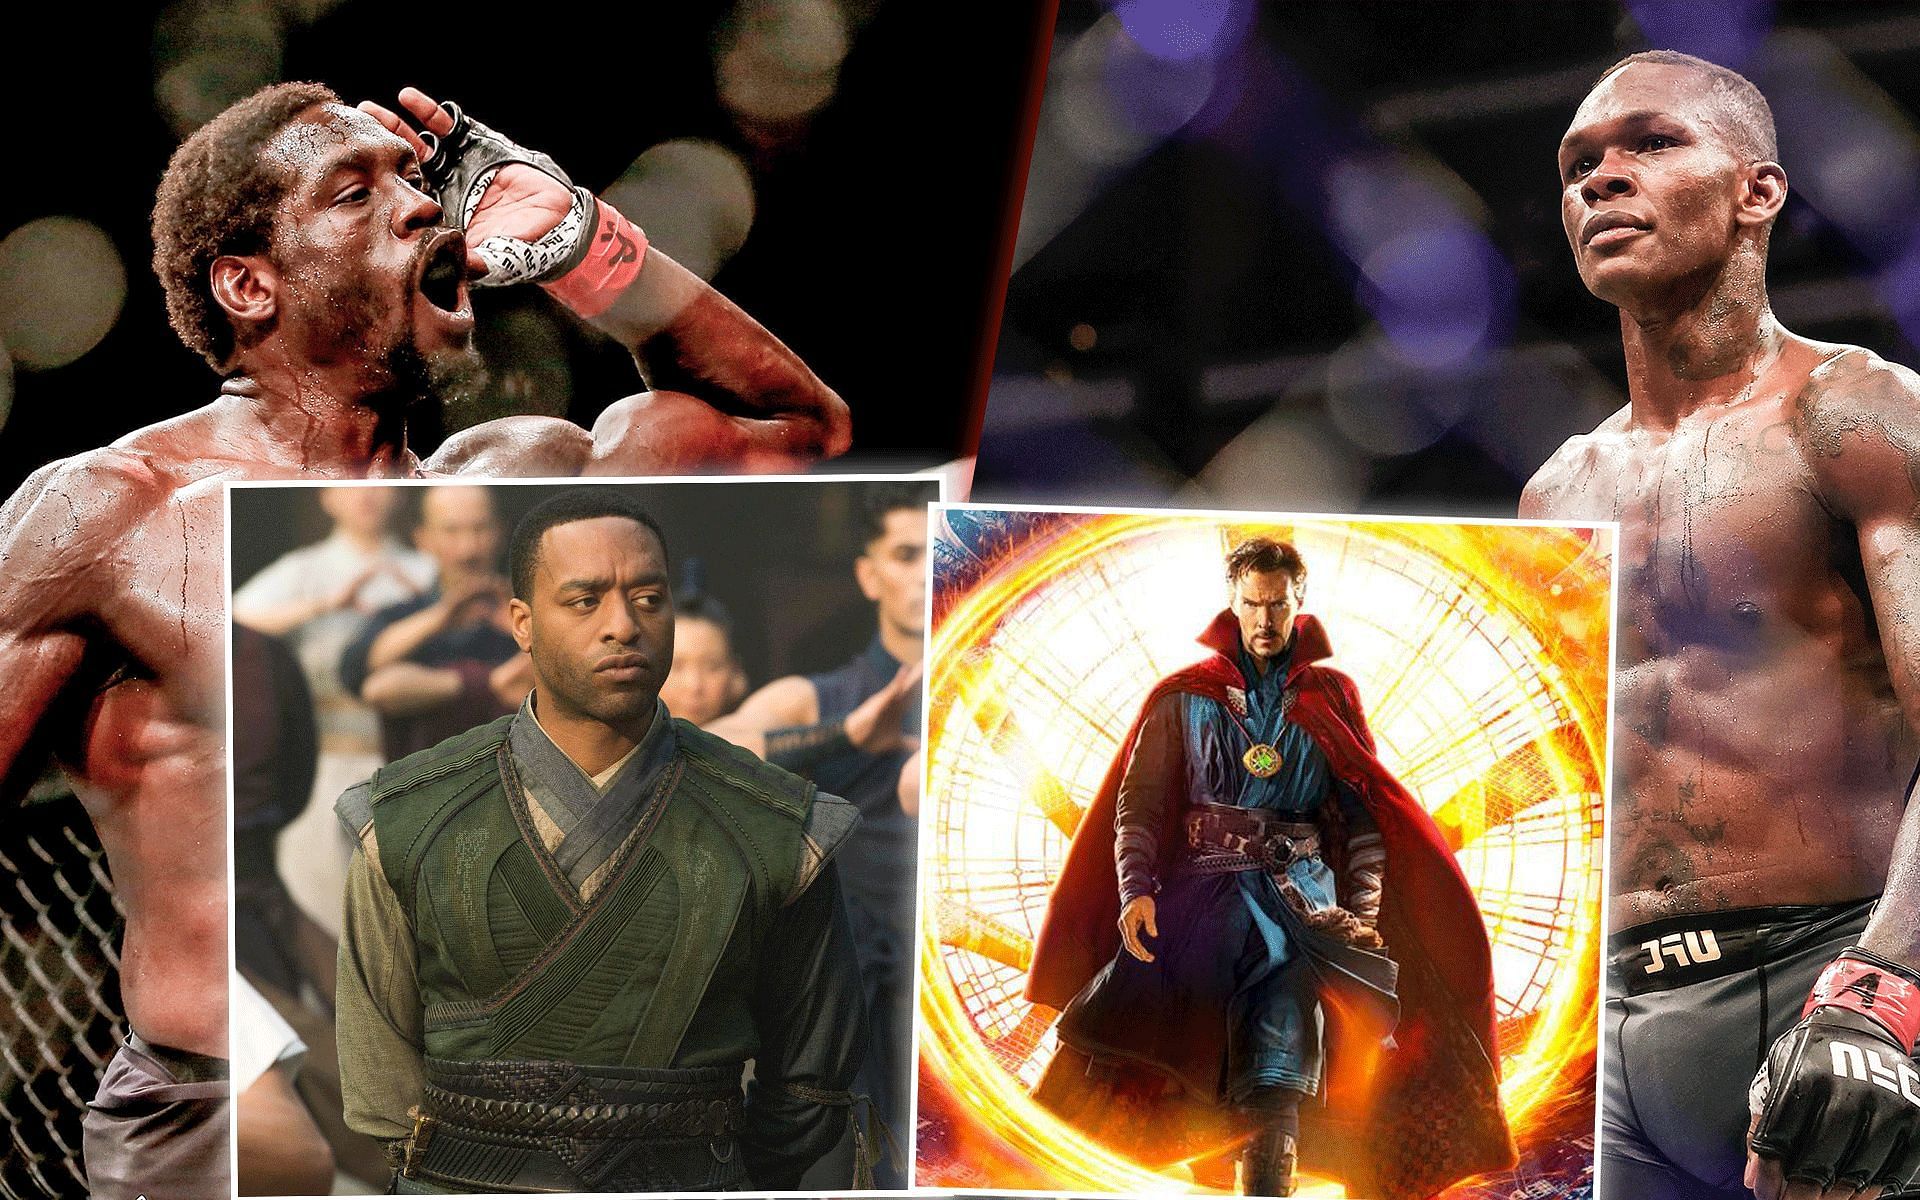 Jared Cannonier compares himself and Israel Adesanya to Dr. Strange and Baron Mordo [Photo credit: @marvel on Twitter, marvel.com]